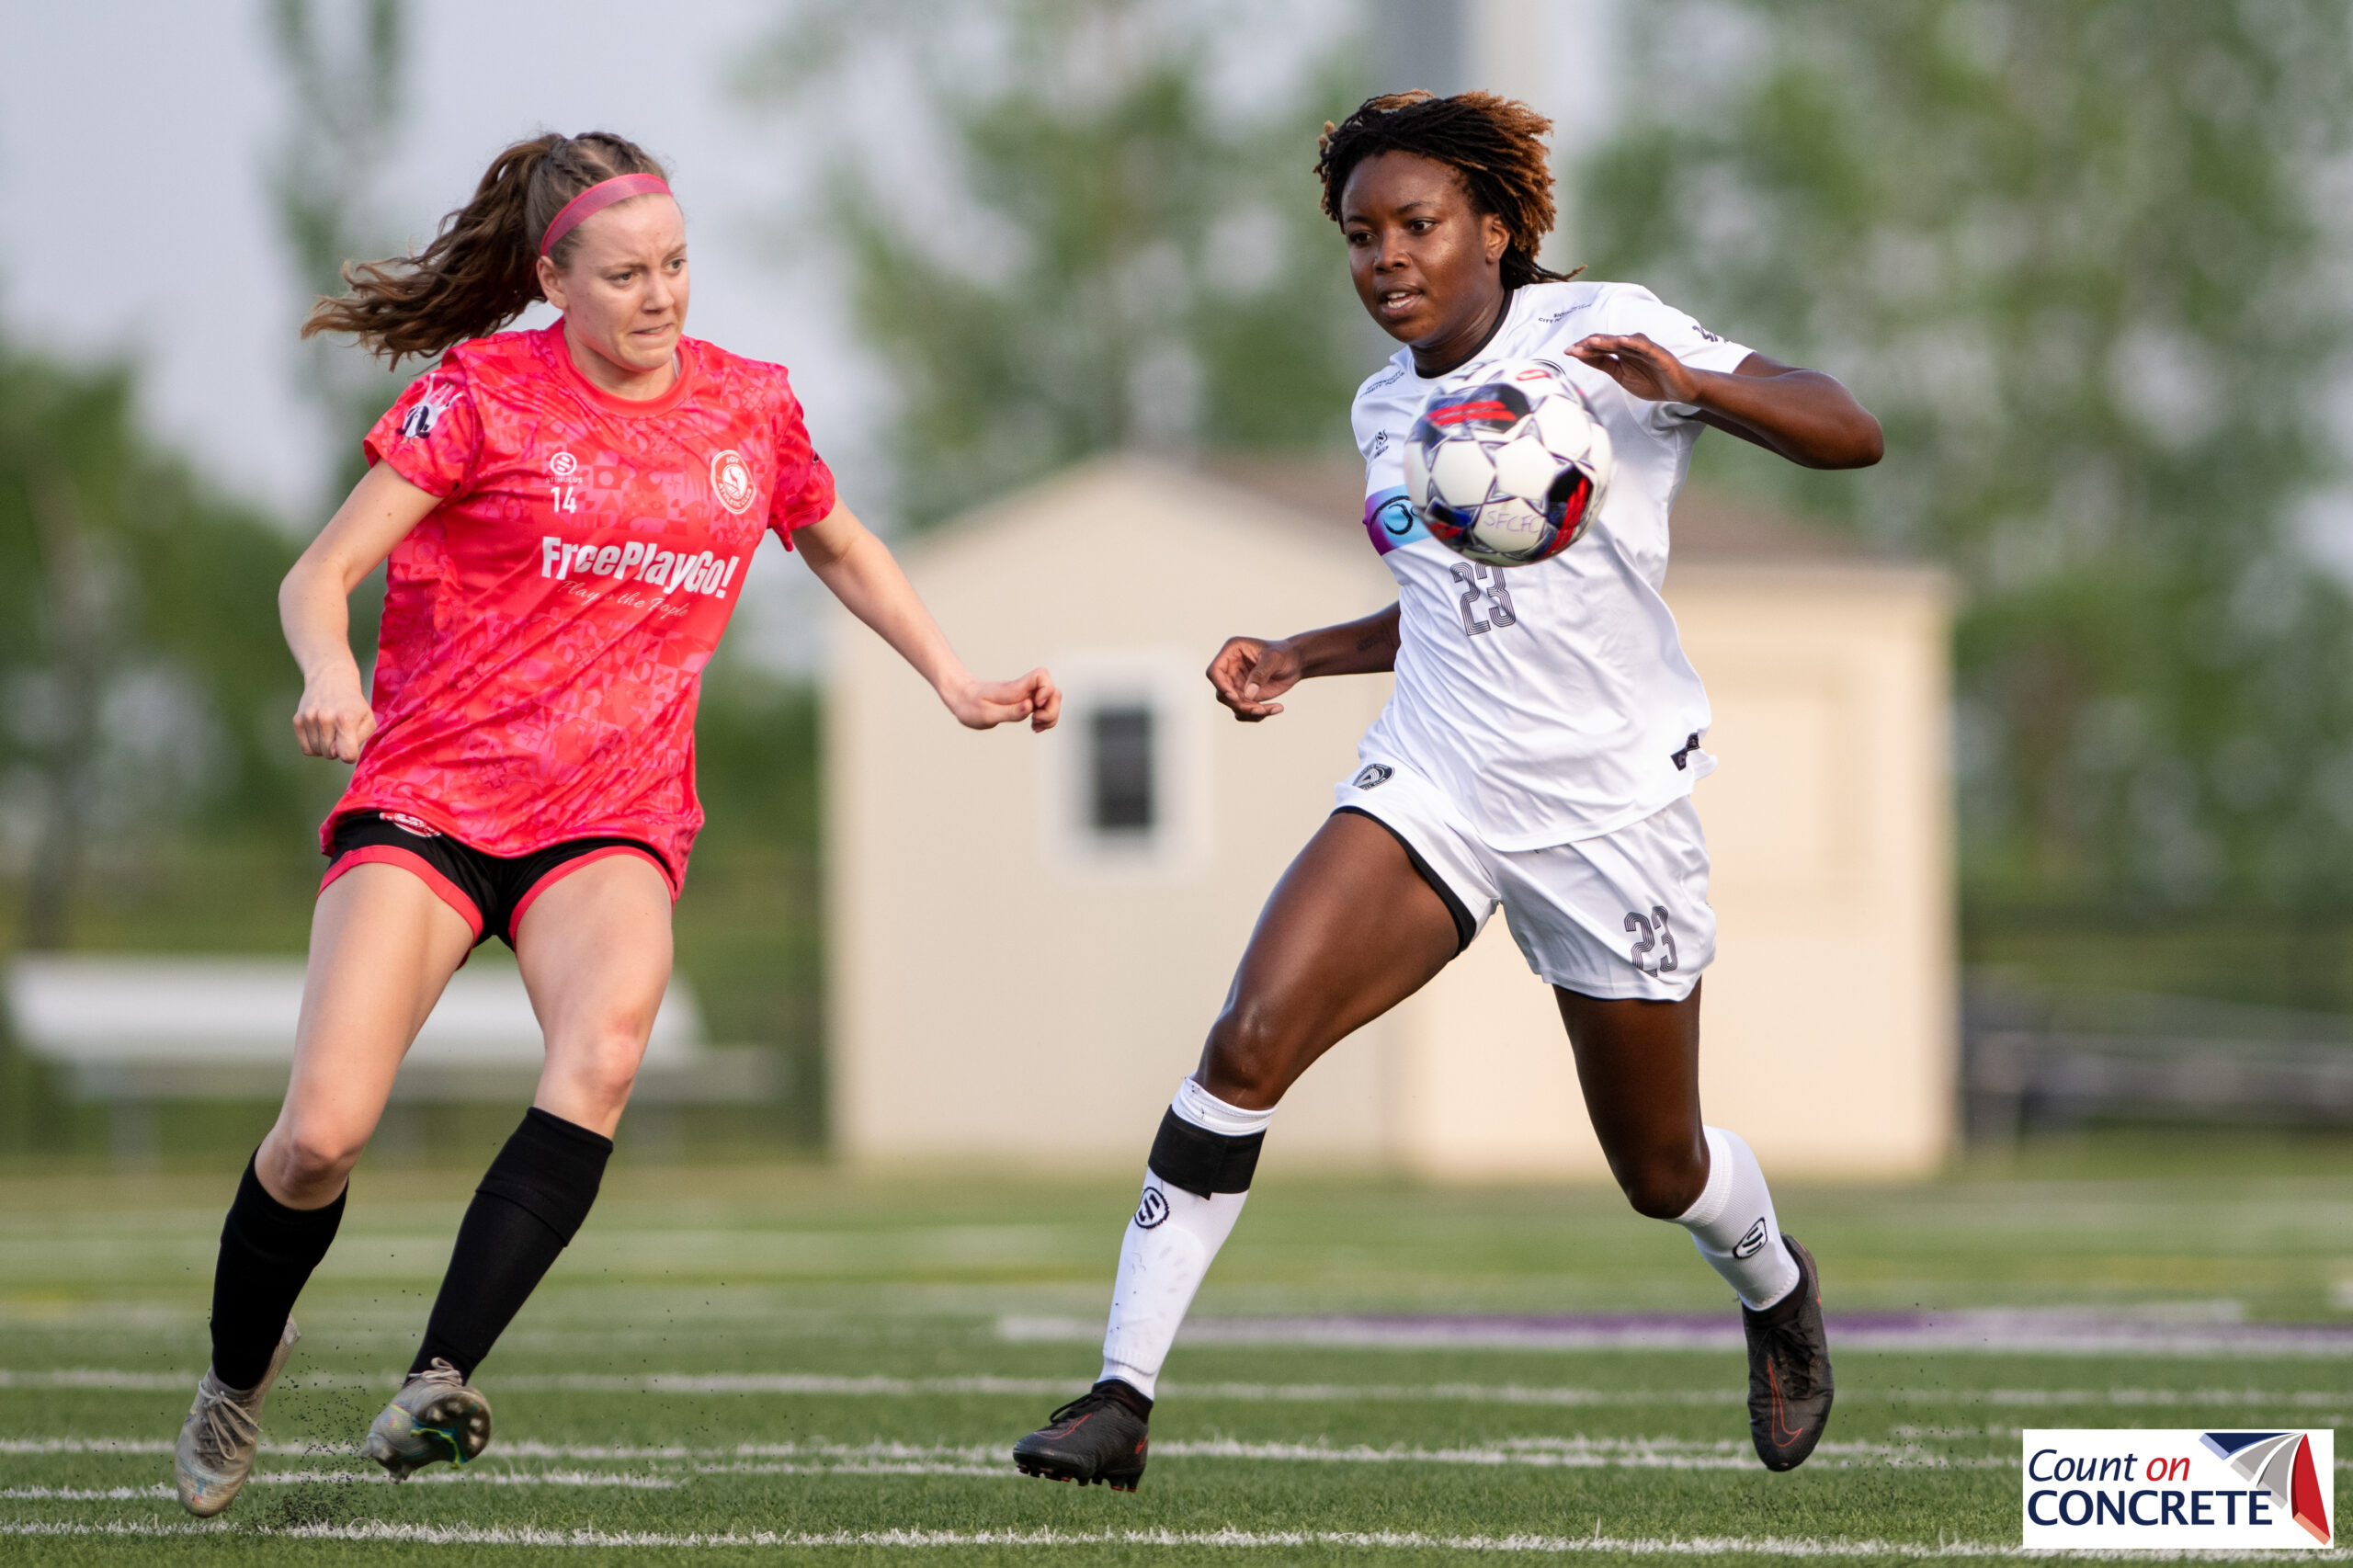 One woman in a hot pink jersey and another in an all white jersey compete for a soccer ball